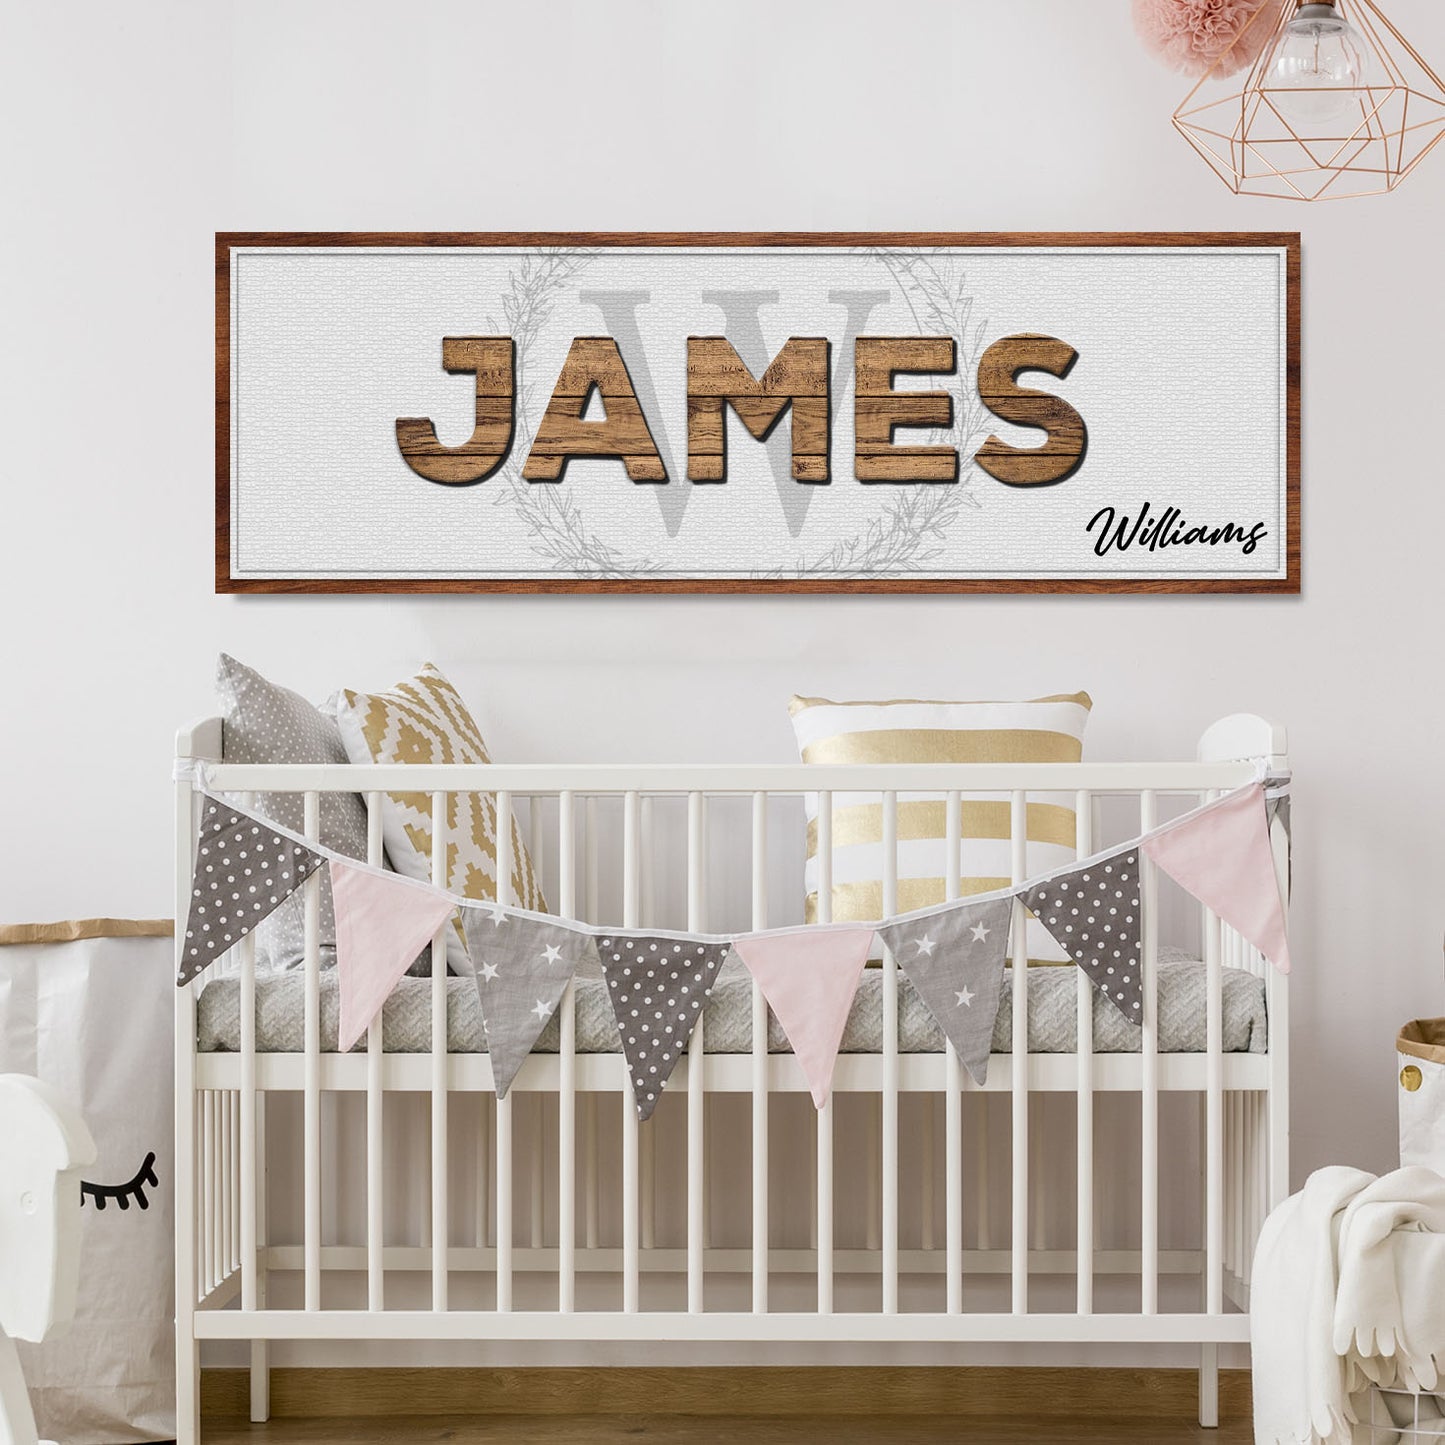 Kid's Room Name Sign II - Image by Tailored Canvases